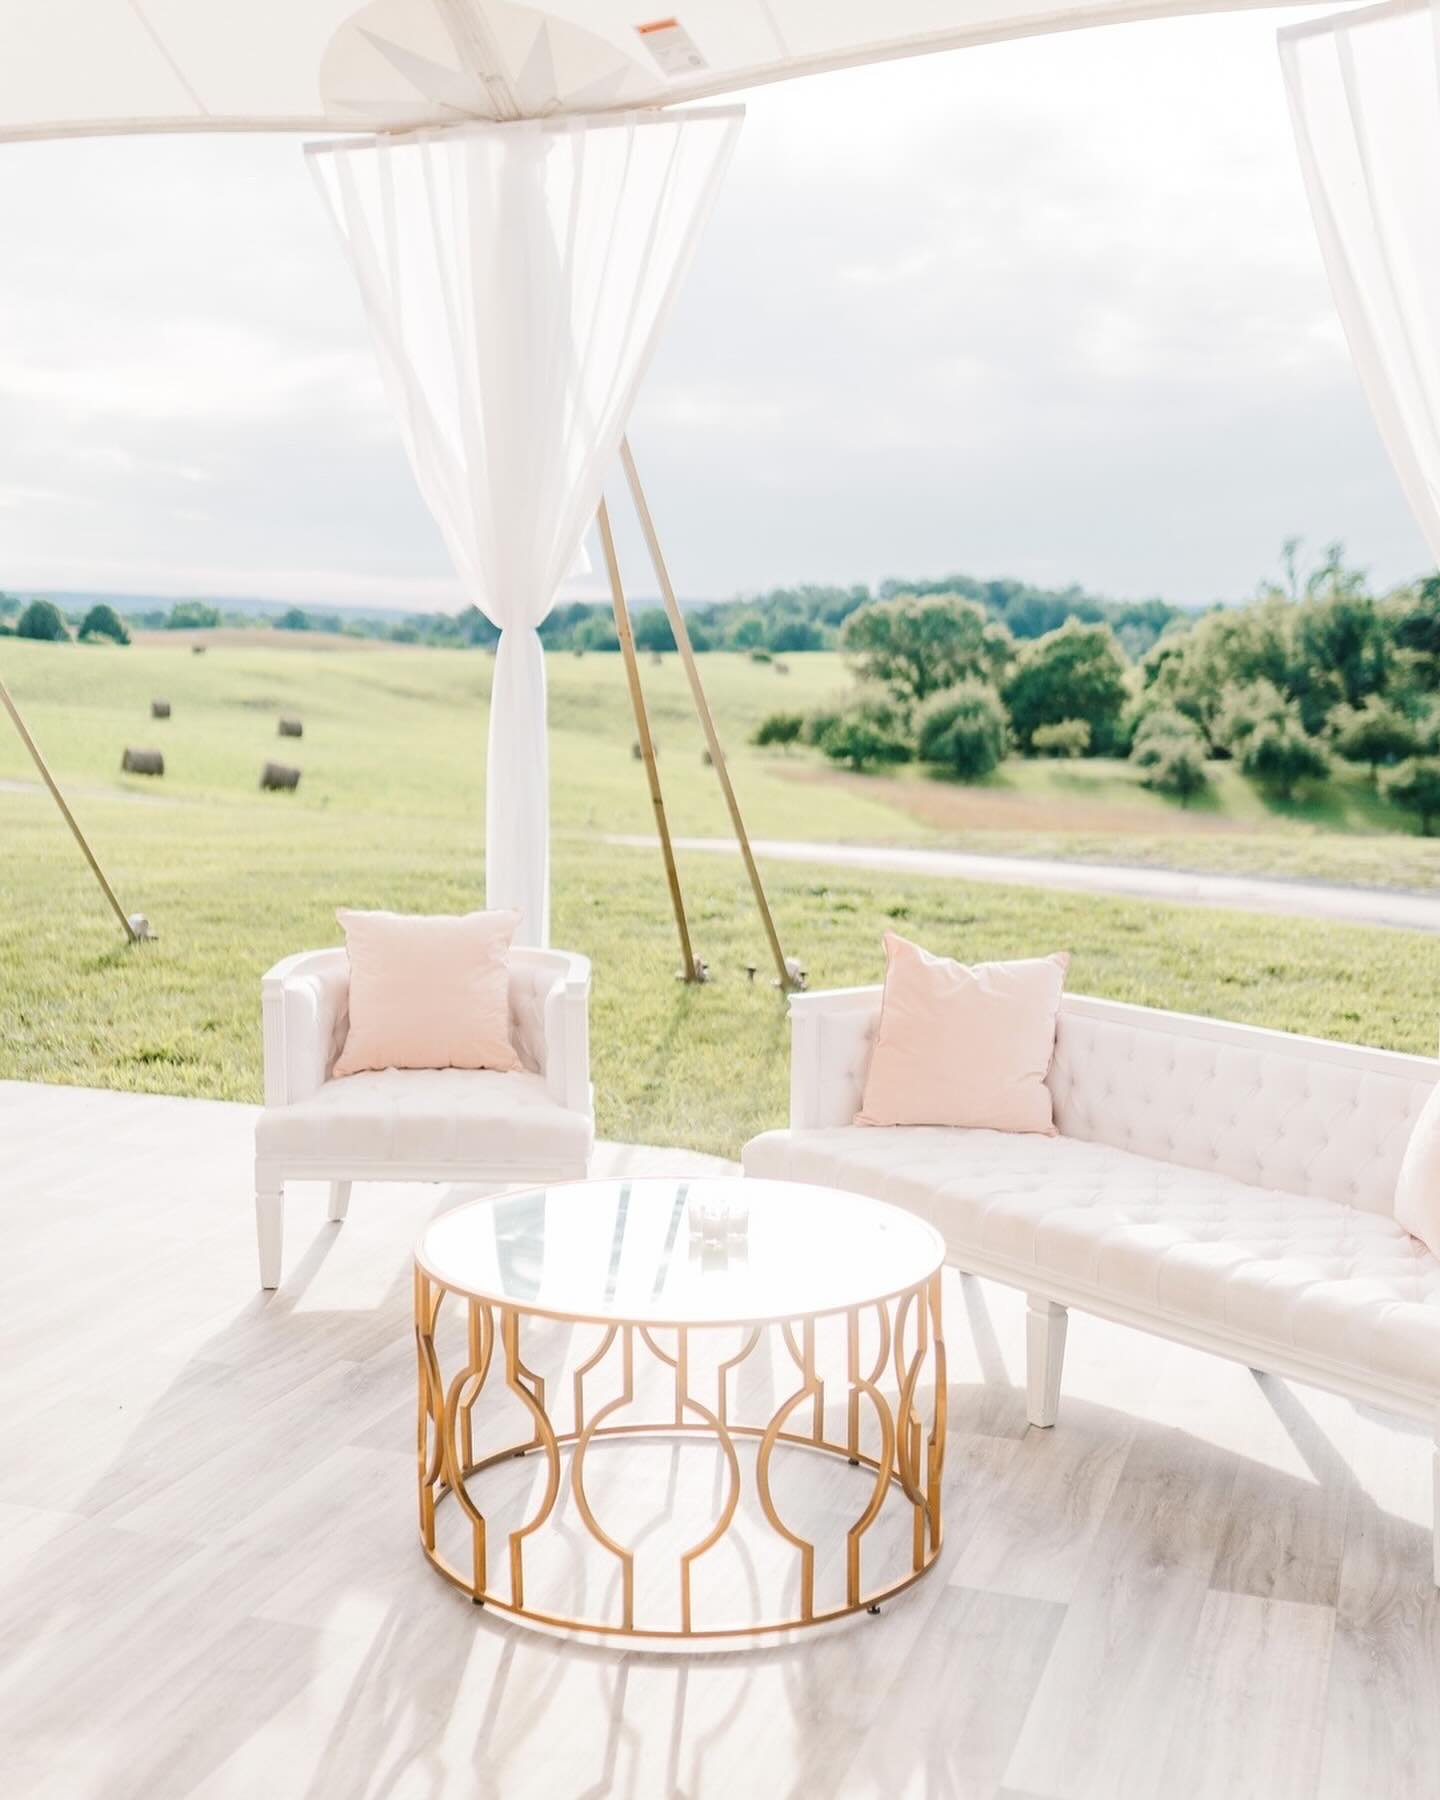 Take a seat, relax, and enjoy the view. 
⠀⠀⠀⠀⠀⠀⠀⠀⠀
Planning + Design: @nouvelleweddings @lynn_aaron
Photography: @megankelseyglasbrenner
Accommodations, Catering + Venue: @goodstoneinn
Beauty: @updosforidos
Bride Dress: @sarahseven
Bride Shoes: @loef